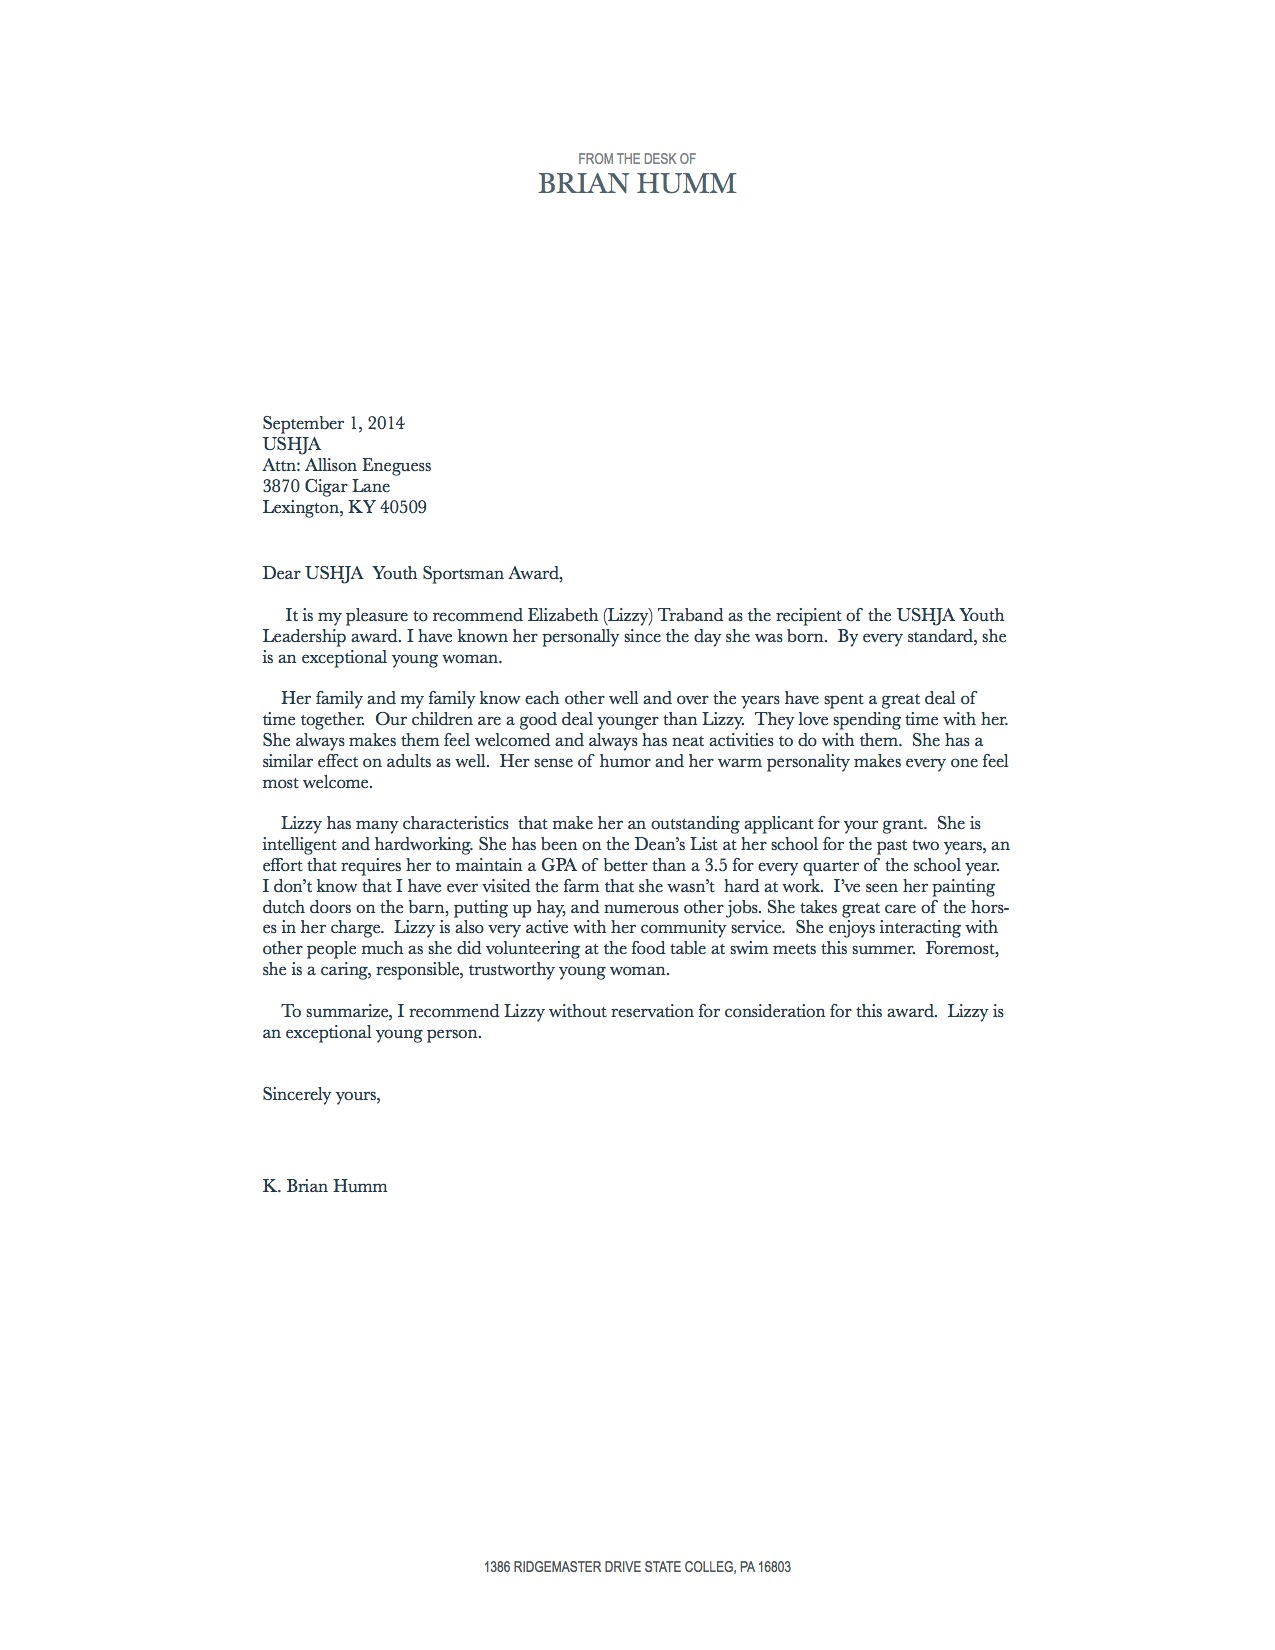 Letter Of Recommendation For Youth Leadership Akali for size 1275 X 1650